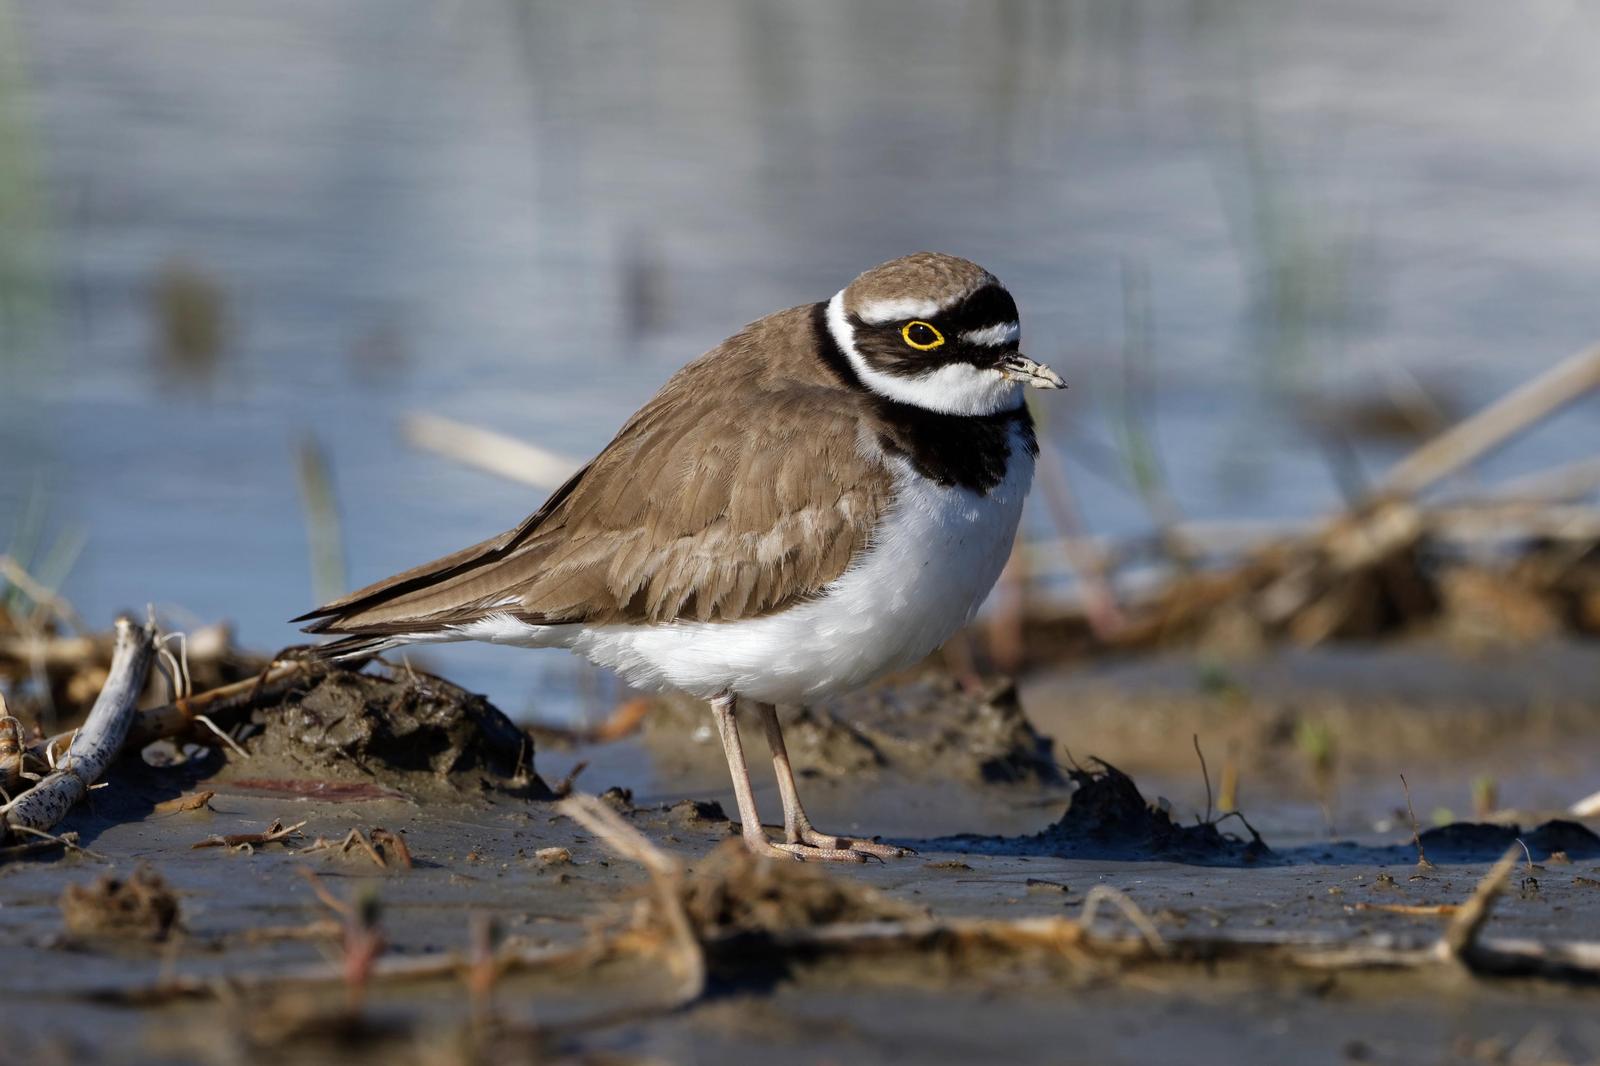 Little Ringed Plover Photo by Robert Cousins